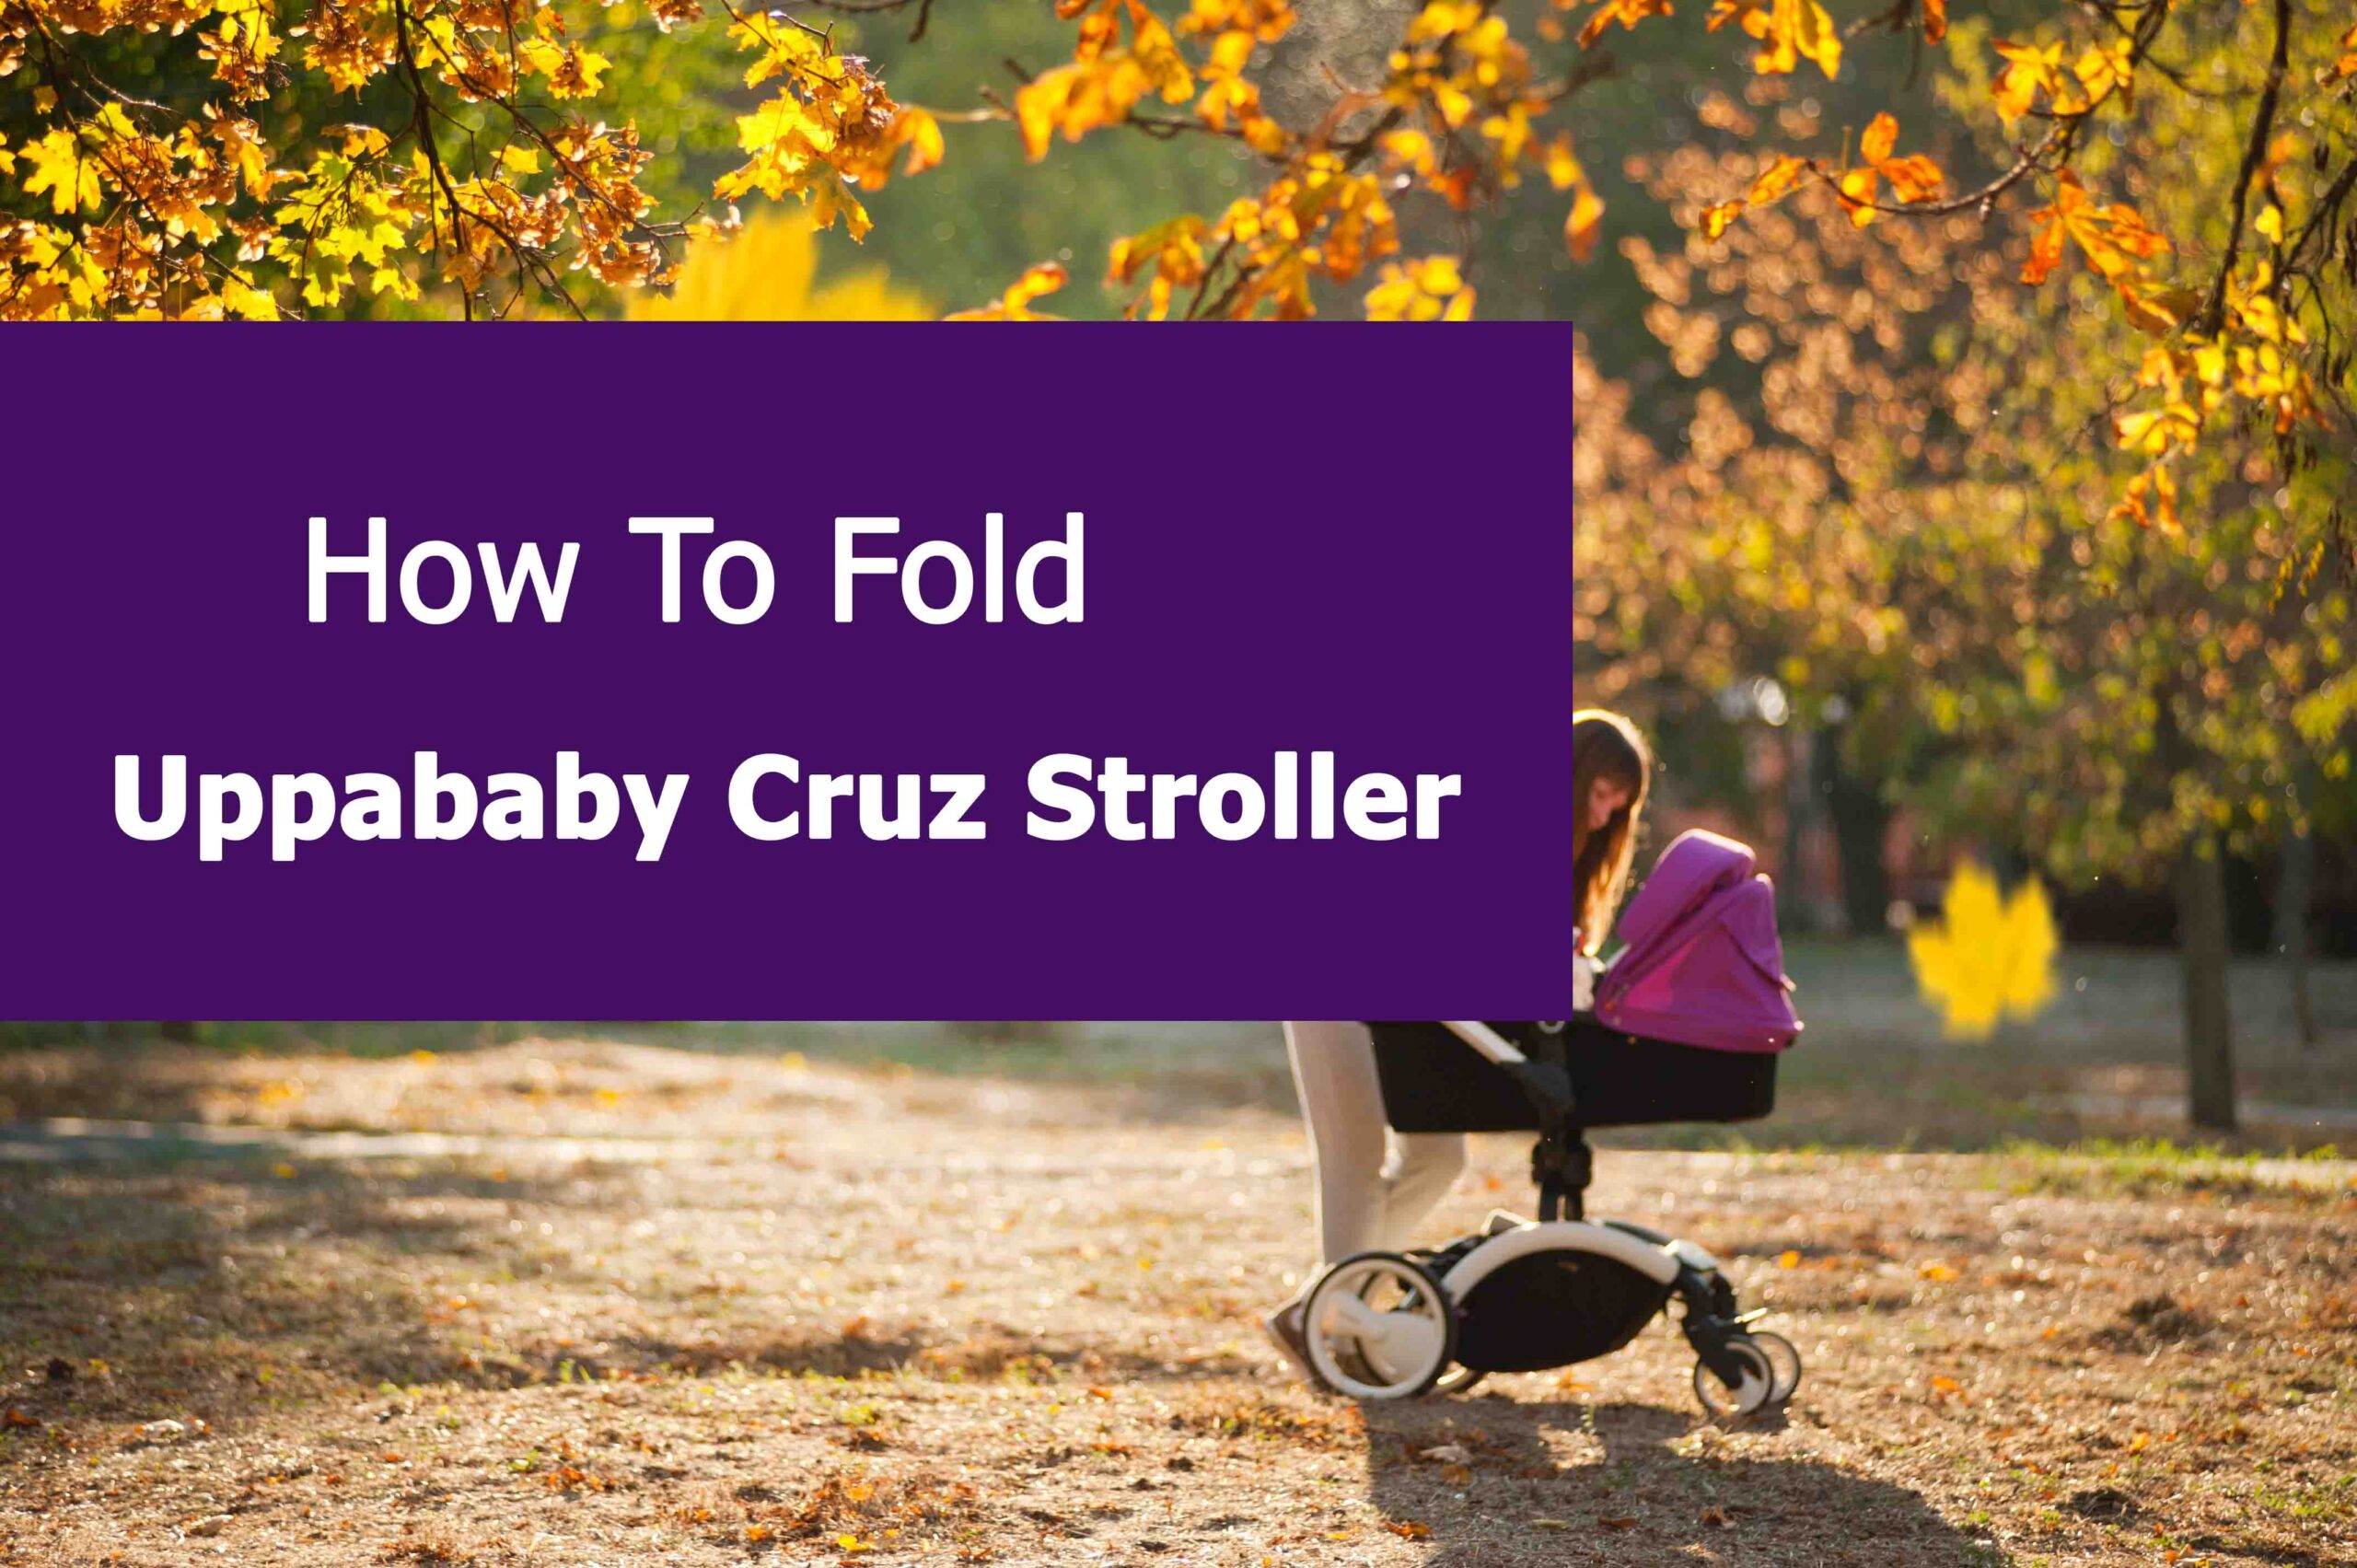 How To Fold An Uppababy Cruz Stroller?